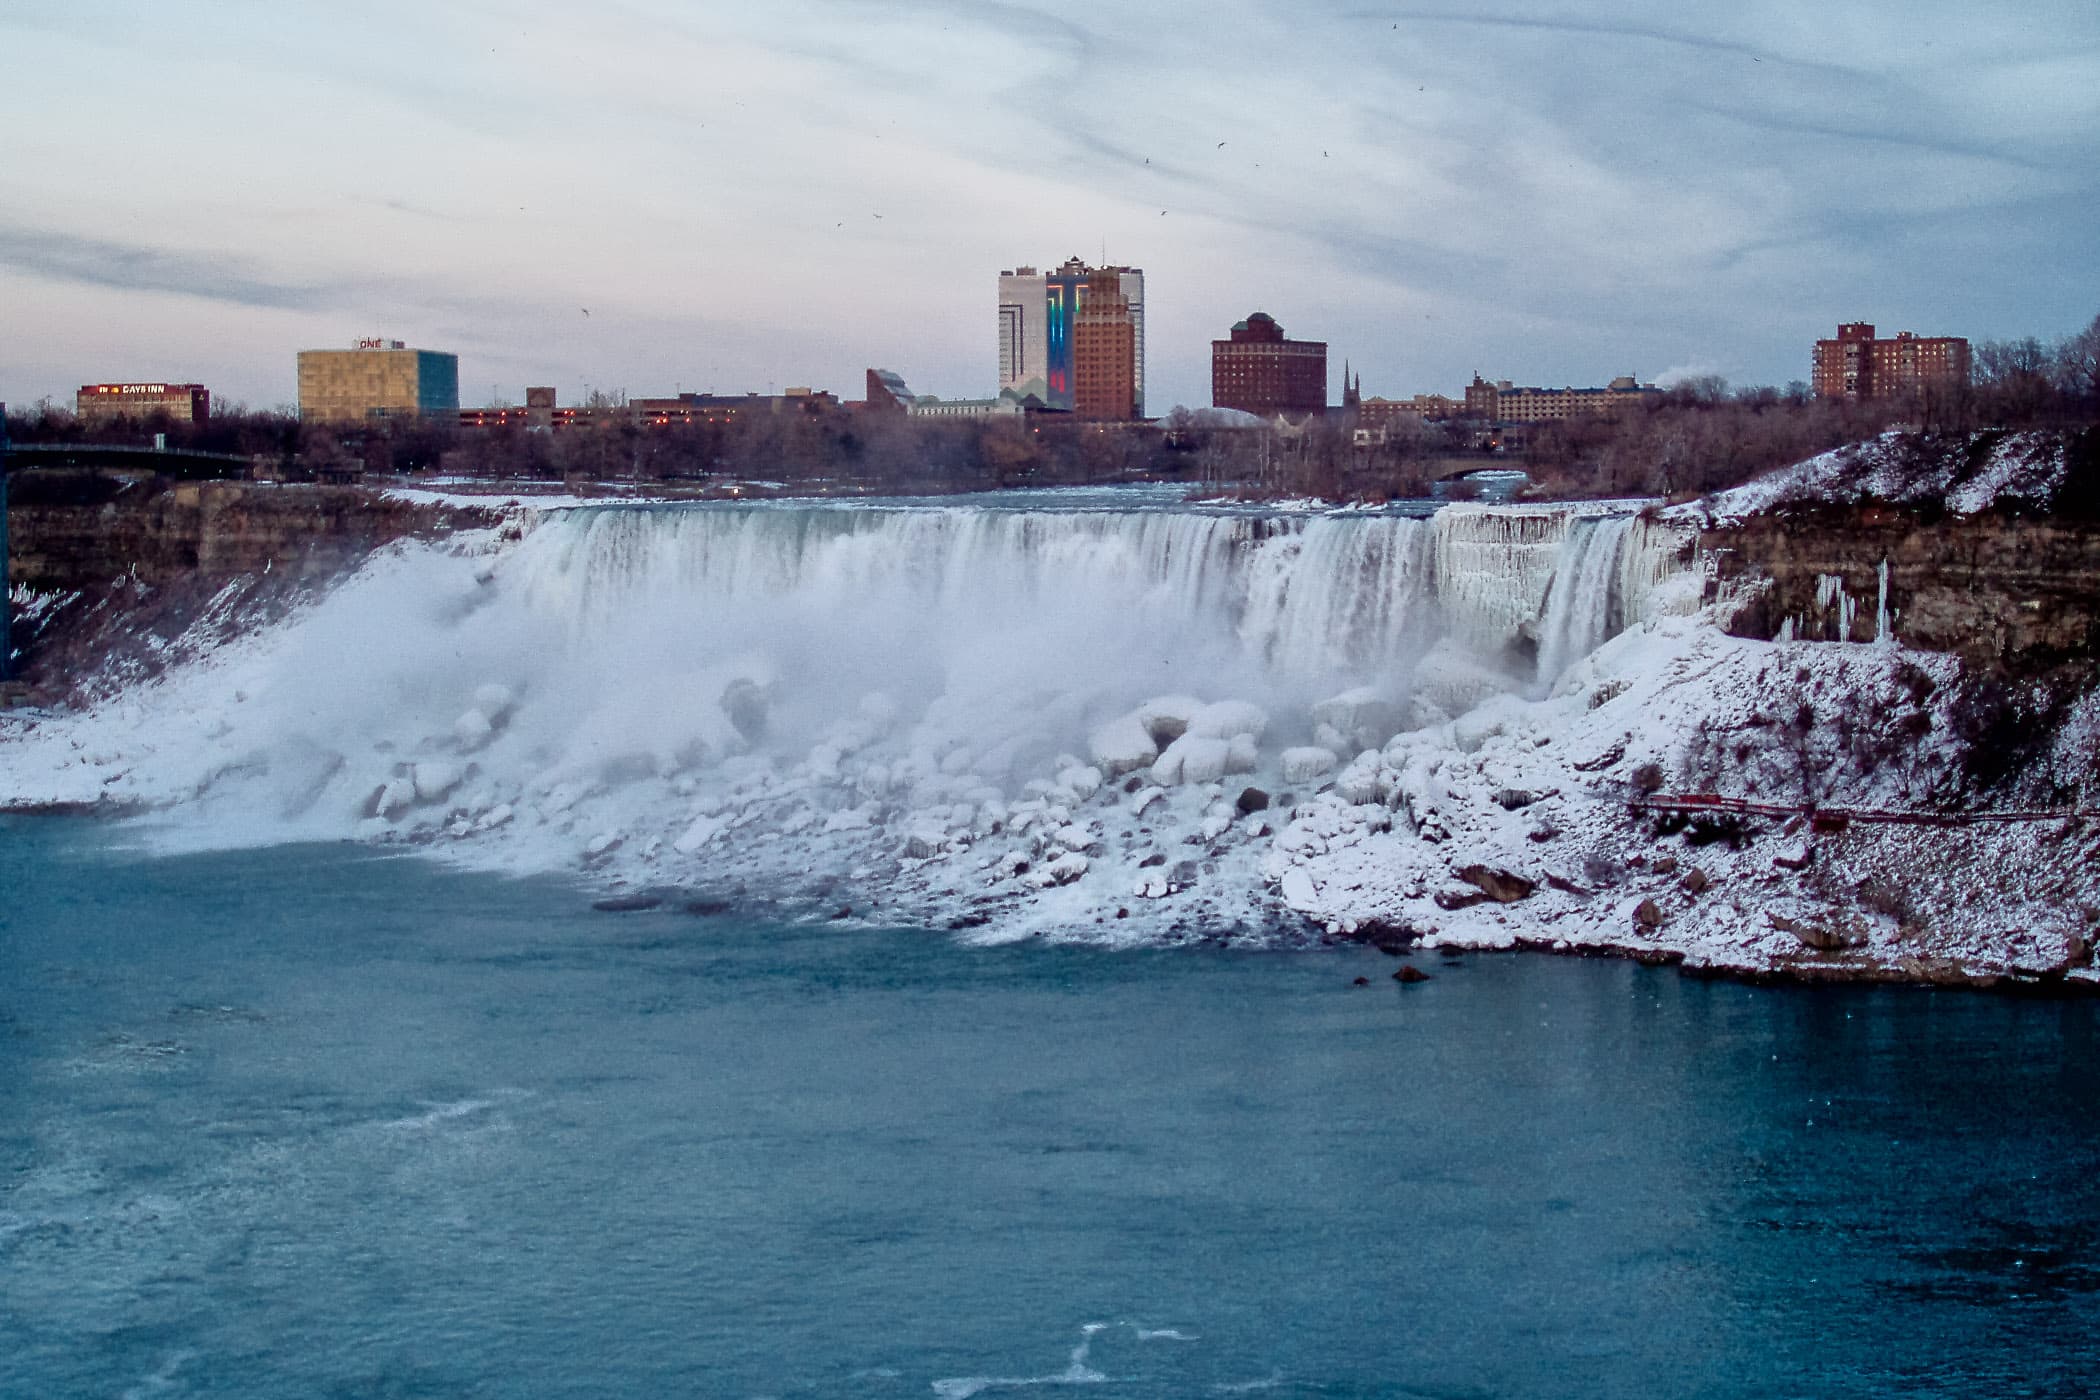 The American Falls at Niagara Falls as seen from the Canadian side of the border on a cold winter evening.